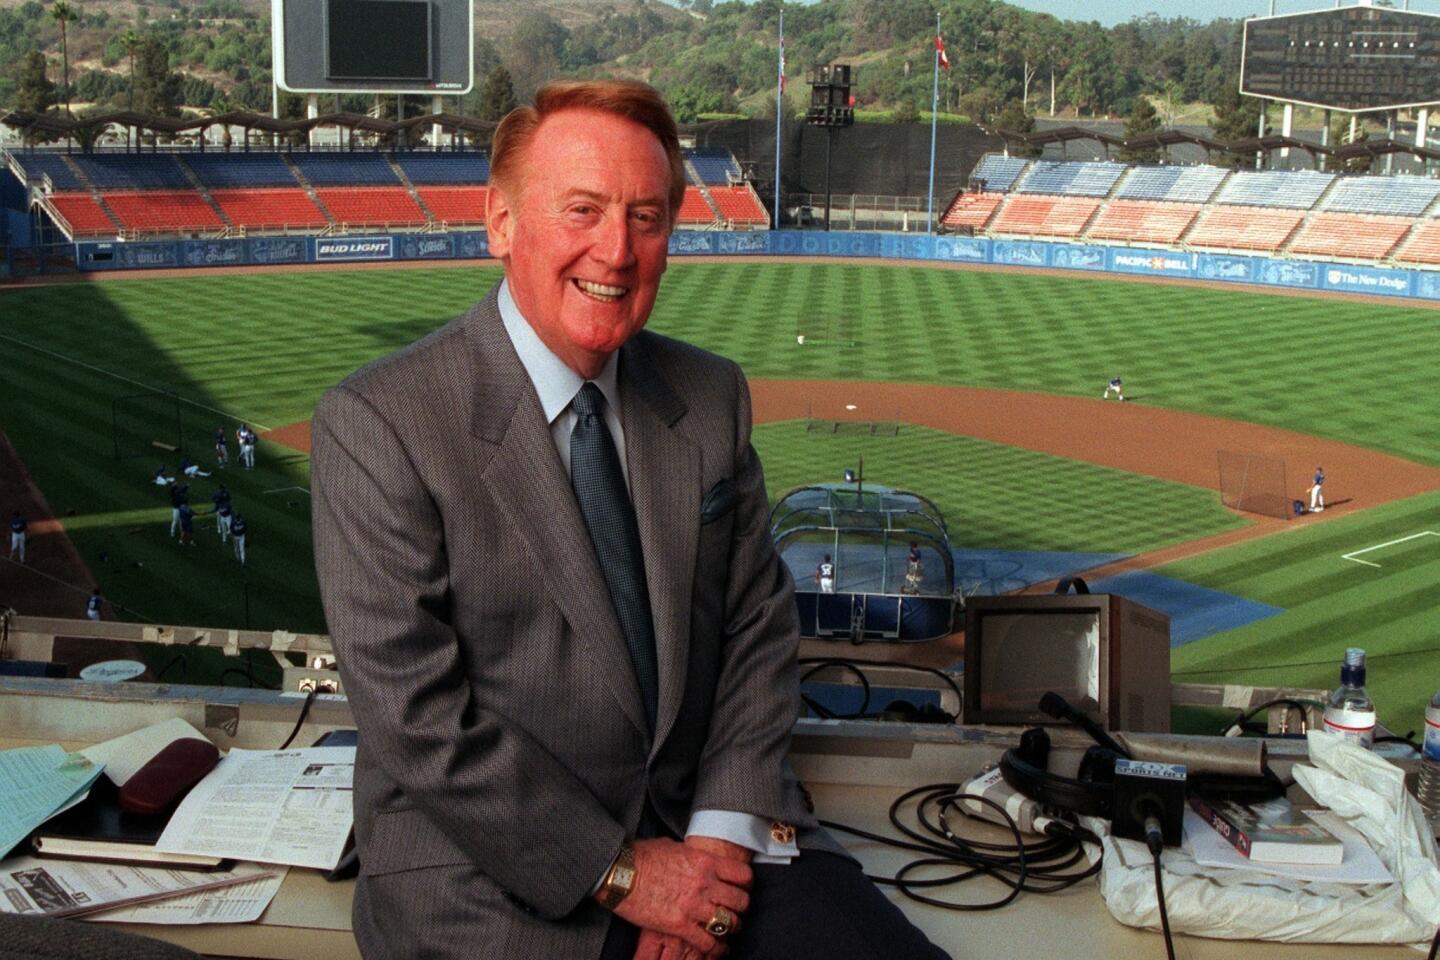 Vin Scully receives Dodgers championship ring